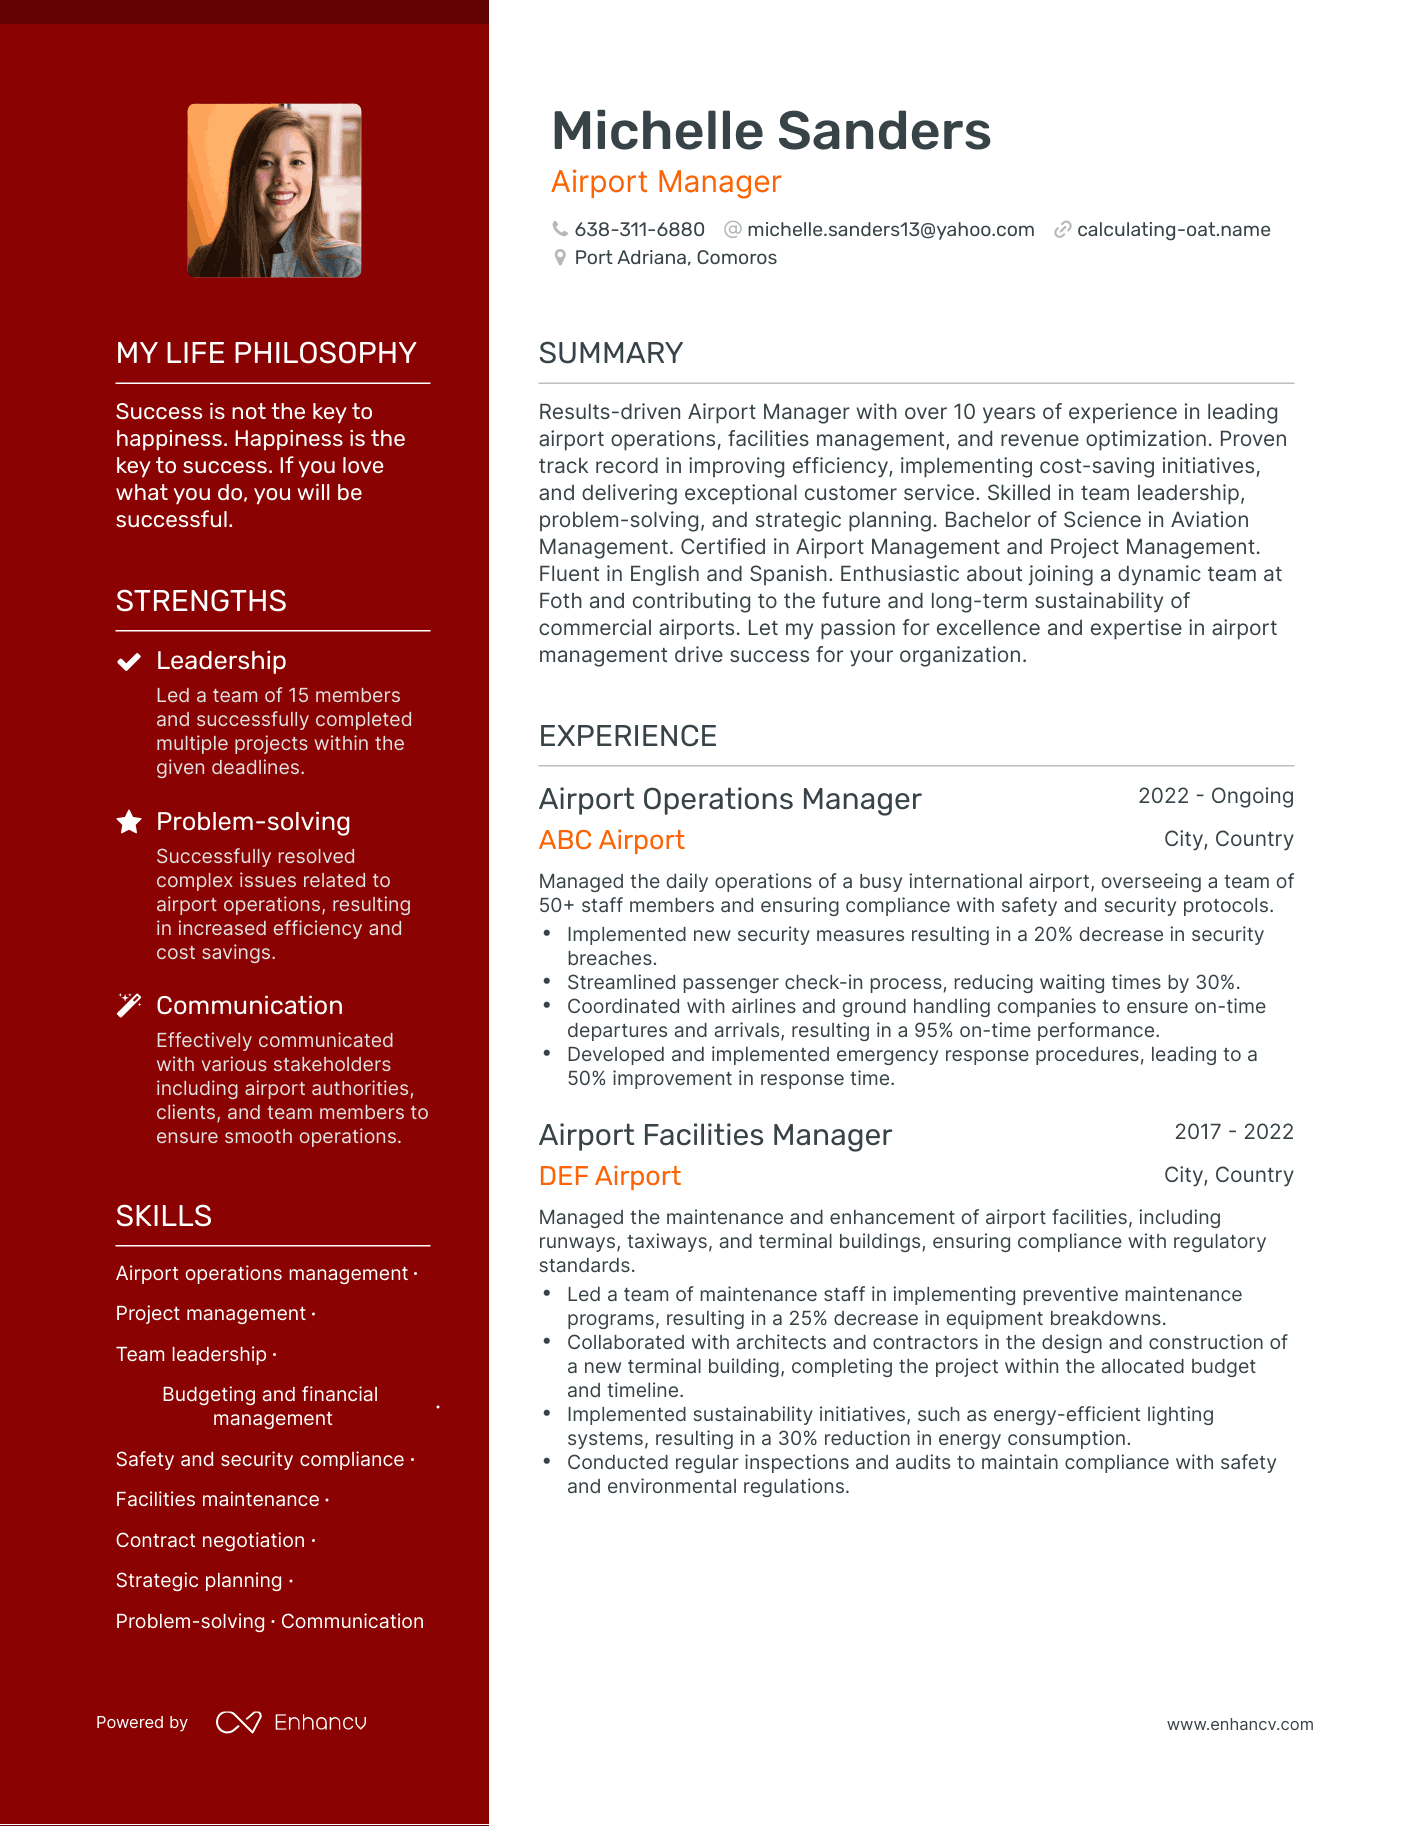 Airport Manager resume example